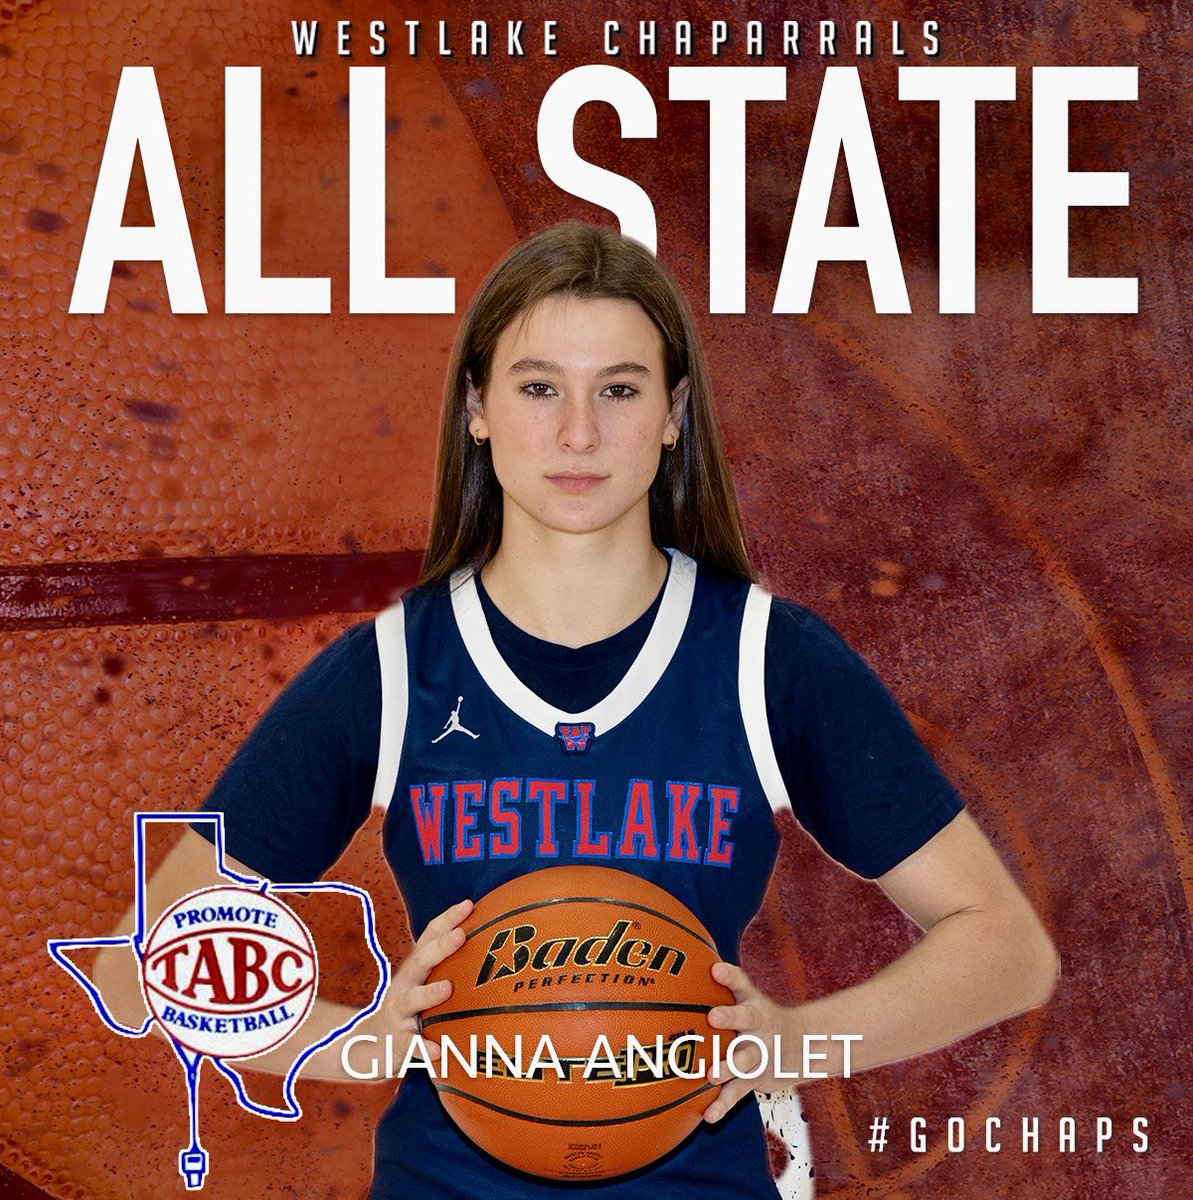 We conclude the Texas Association of Basketball Coaches post season awards with congratulating Gianna Angiolet on her selection to the All-State Team. Gianna led the Chaps in scoring with 18 points per game to go along with 4 rebounds, 3 steals and 3 assists per game. #GoChaps